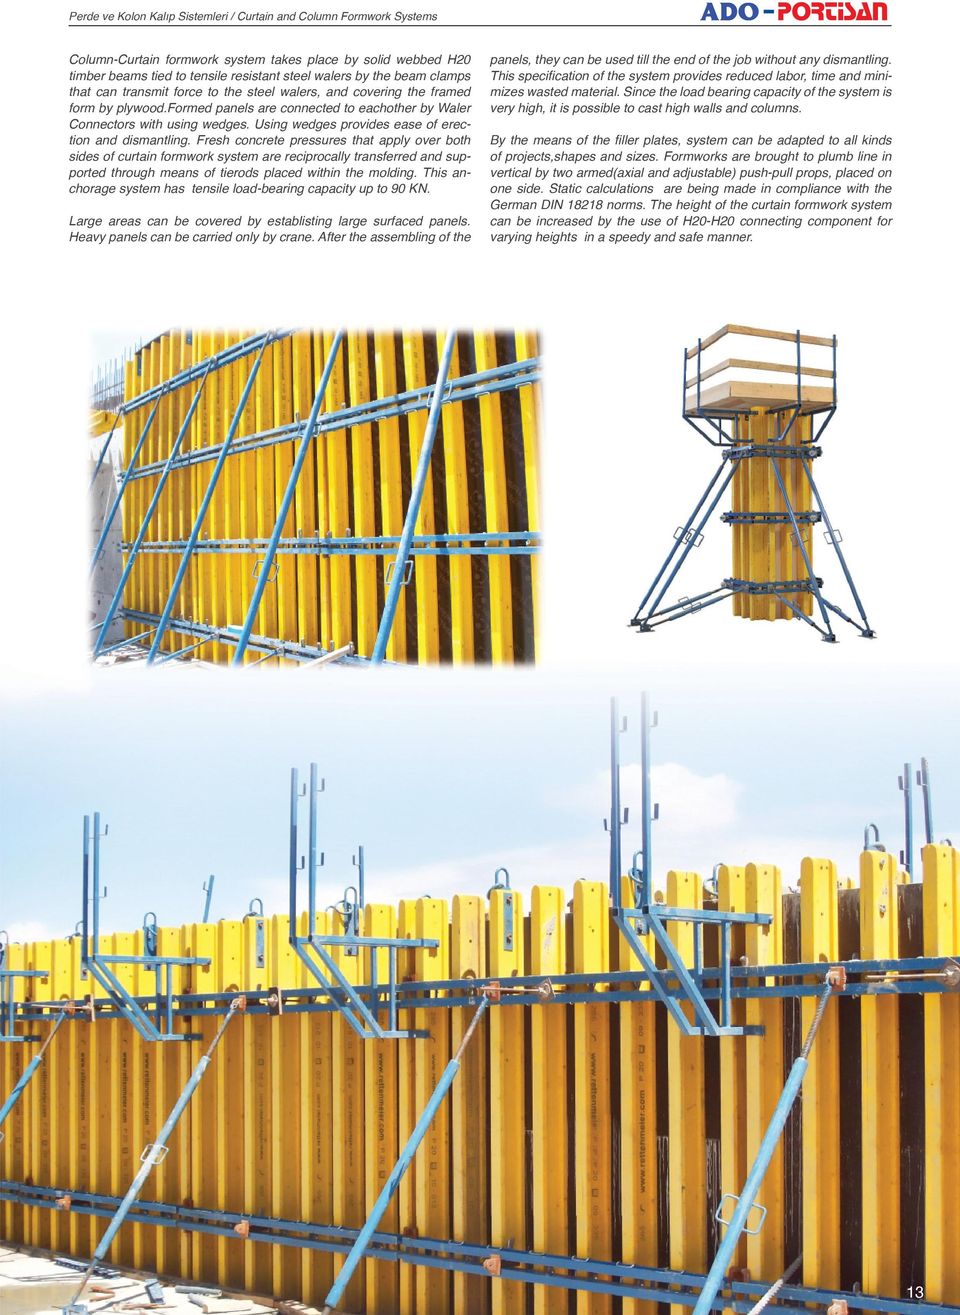 Fresh concrete pressures that apply over both sides of curtain formwork system are reciprocally transferred and supported through means of tierods placed within the molding.